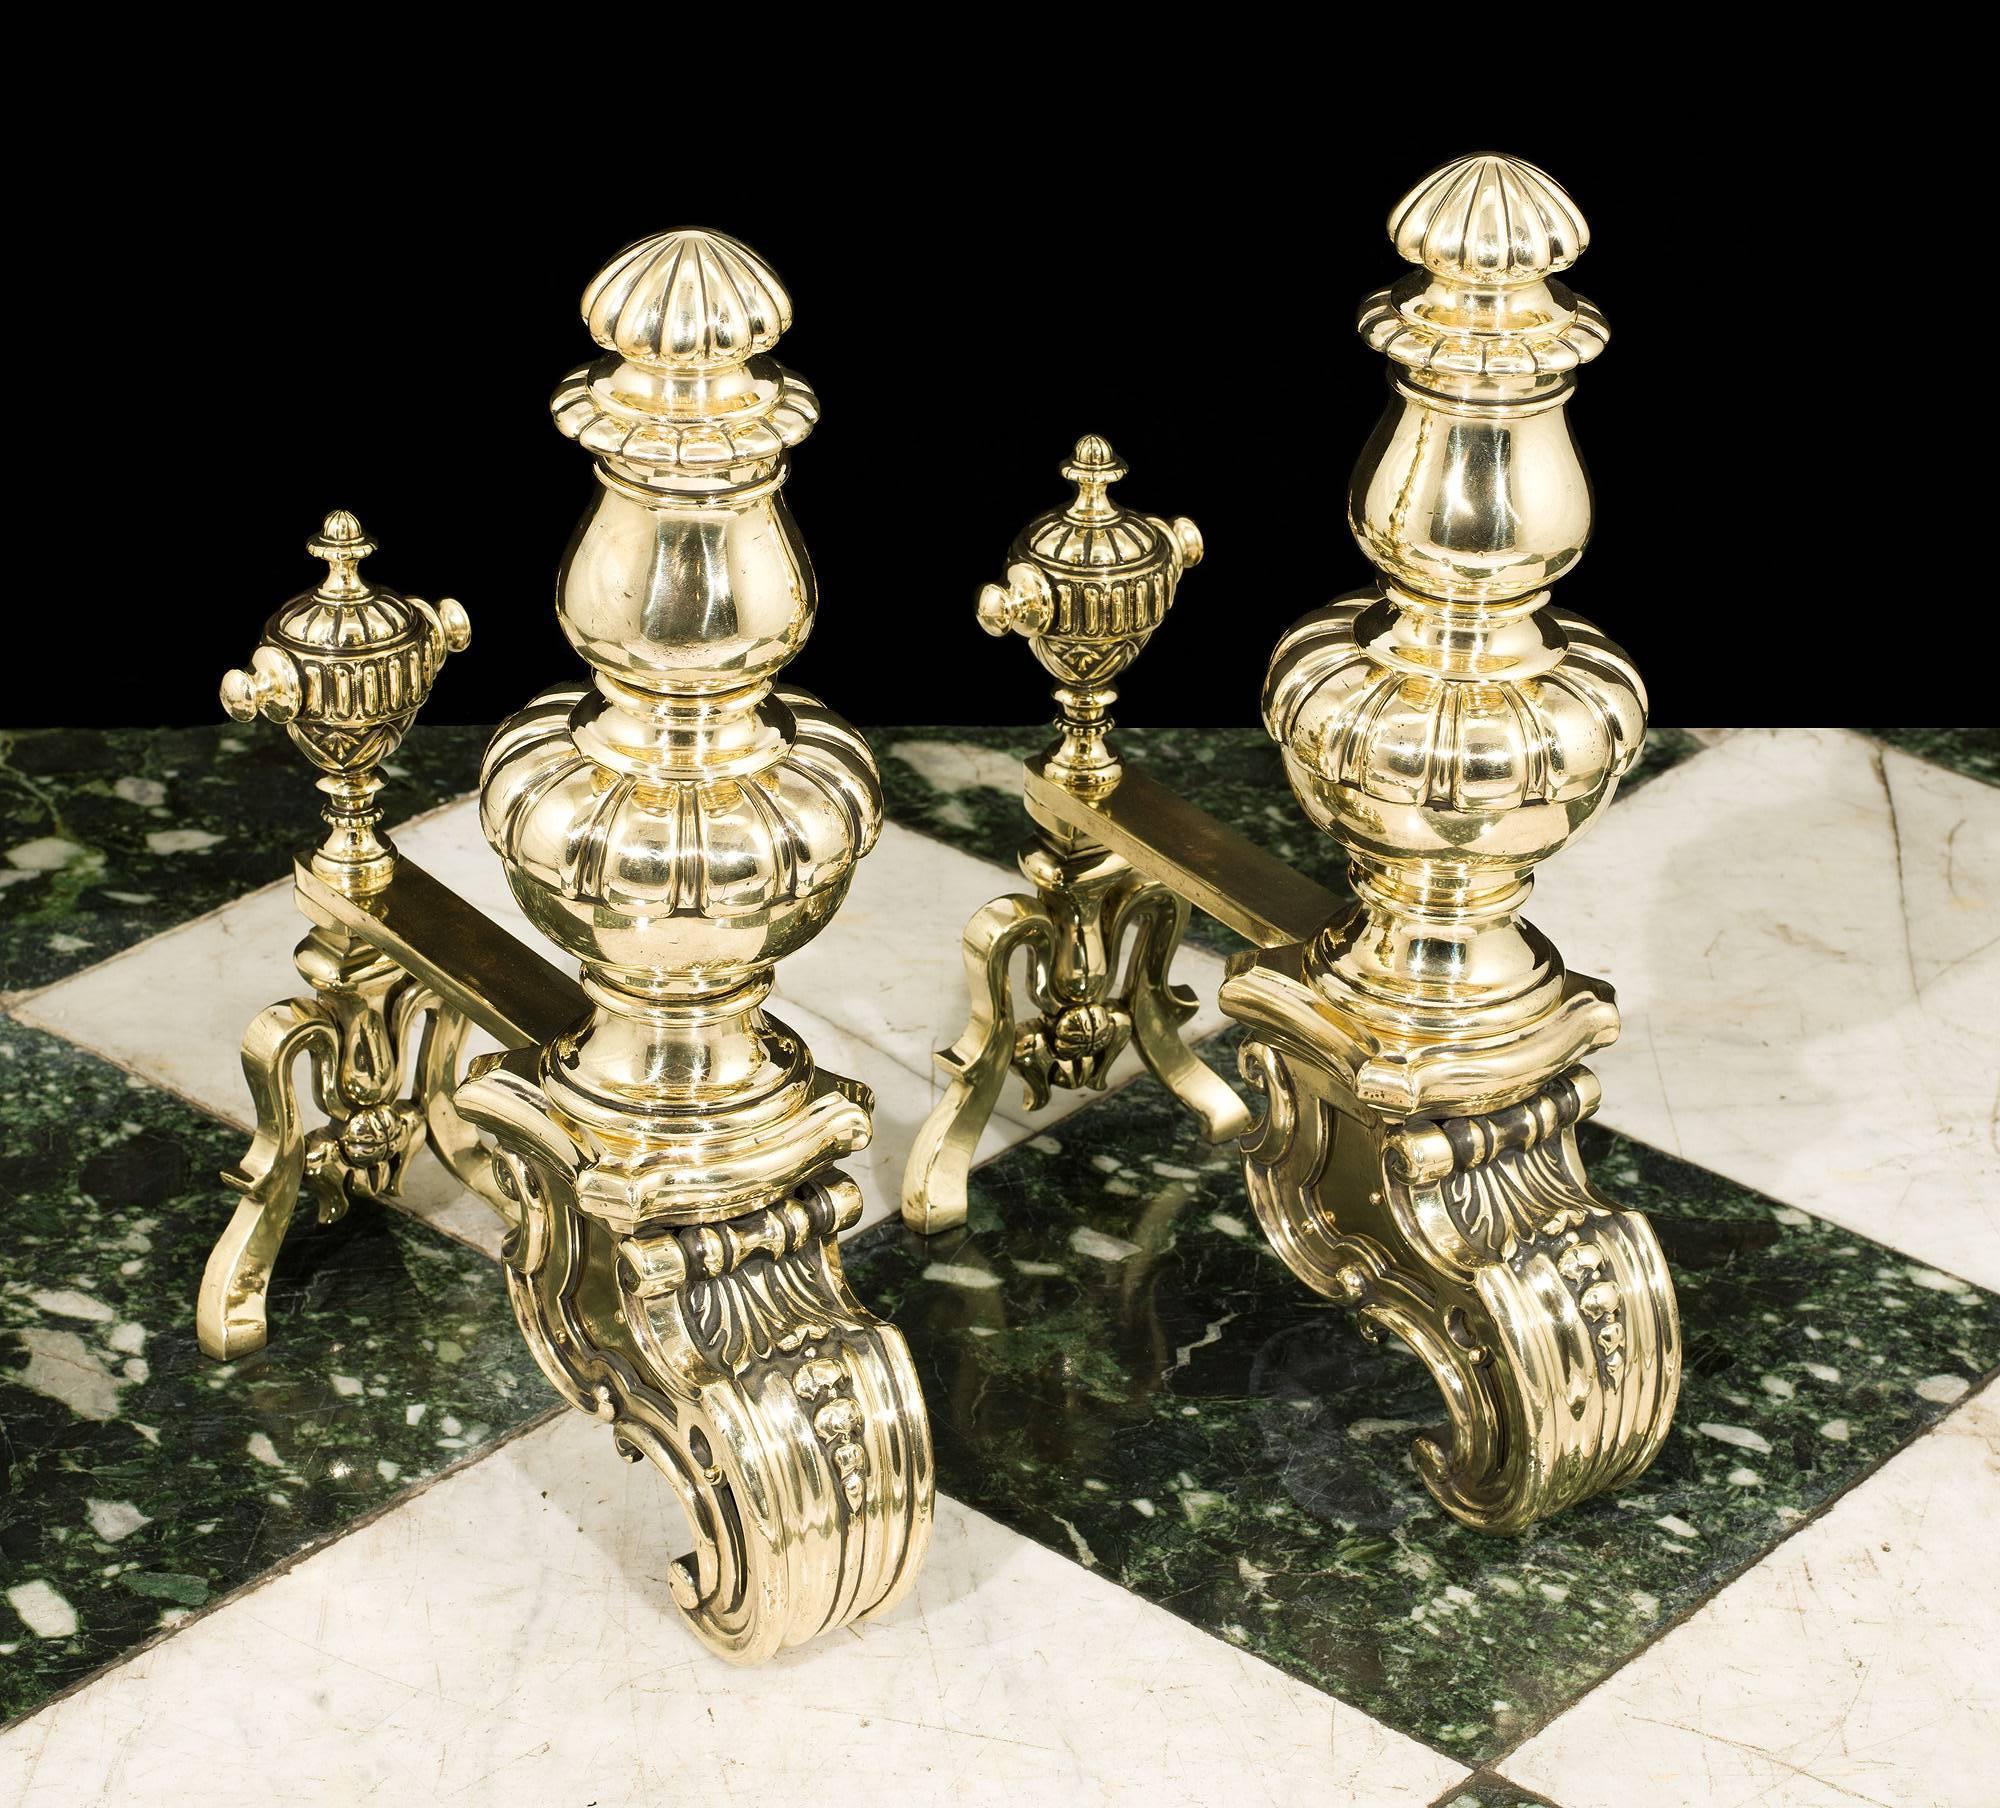 A pair of 19th century brass andirons in the French Baroque style, of fluted baluster urn shape, raised on heavy monopodic scrolled feet. The short back bars mounted by a pair of decorative urn finials and with the diamond registration mark for